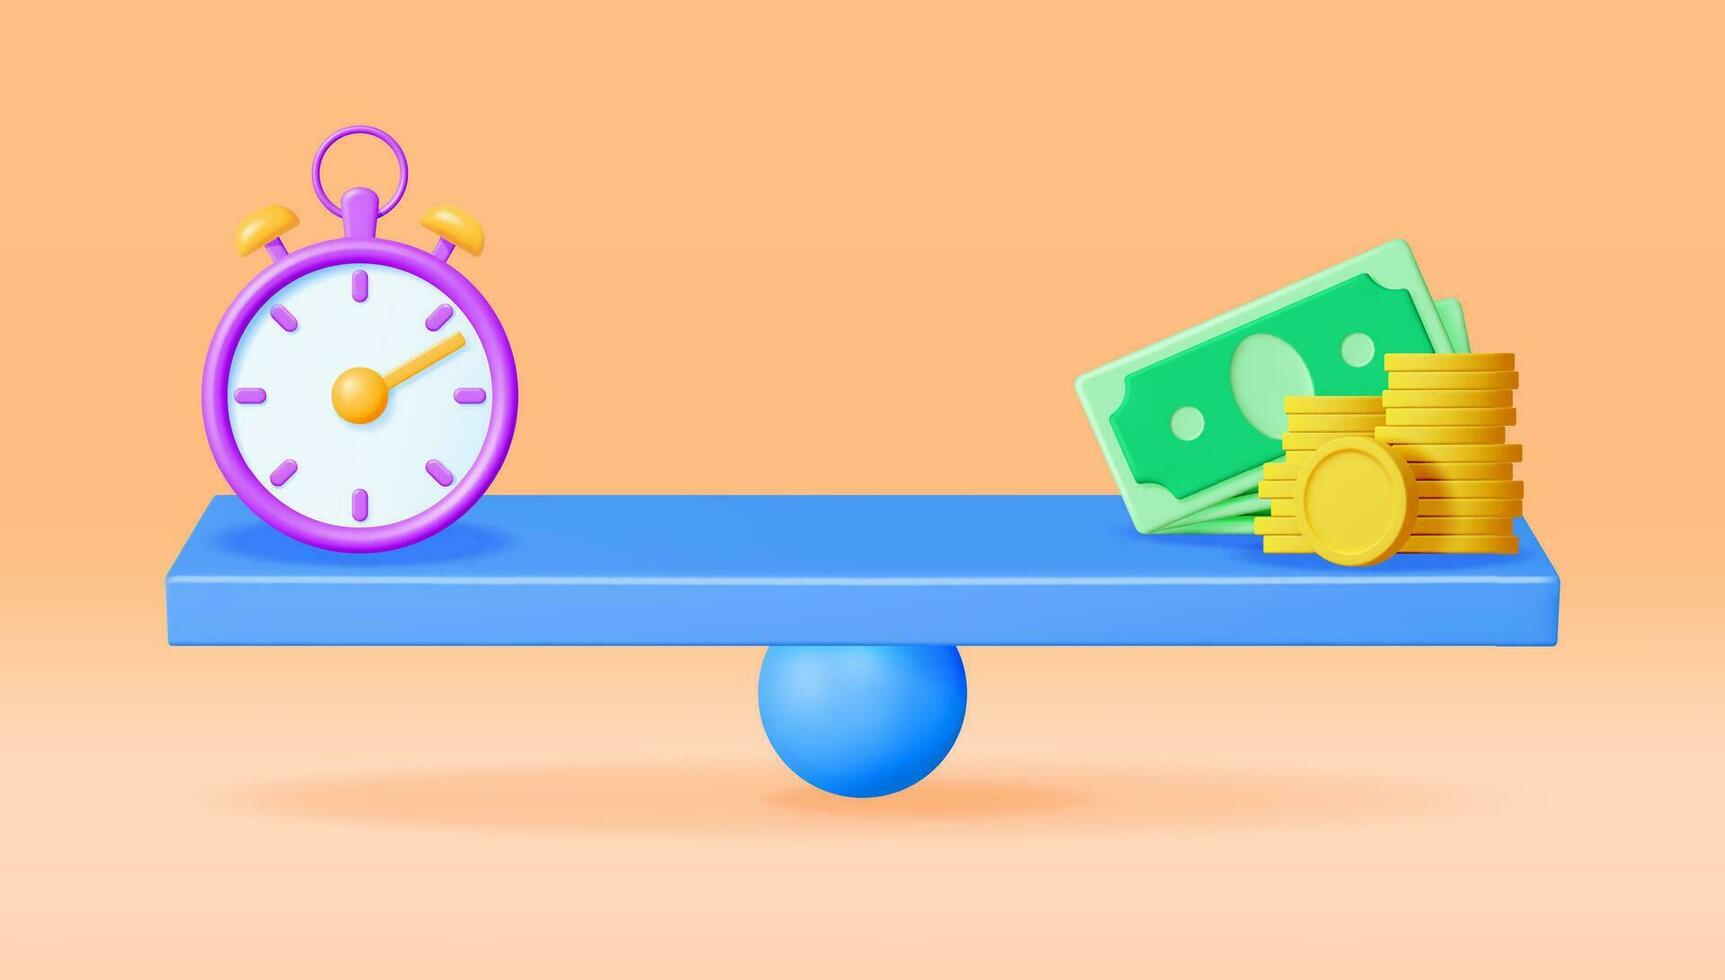 3D Clock and Money on Balance Scales Isolated. Render Time is Money Concept Annual Revenue, Financial Investment, Savings, Bank Deposit, Future Income, Money Benefit. Vector Illustration